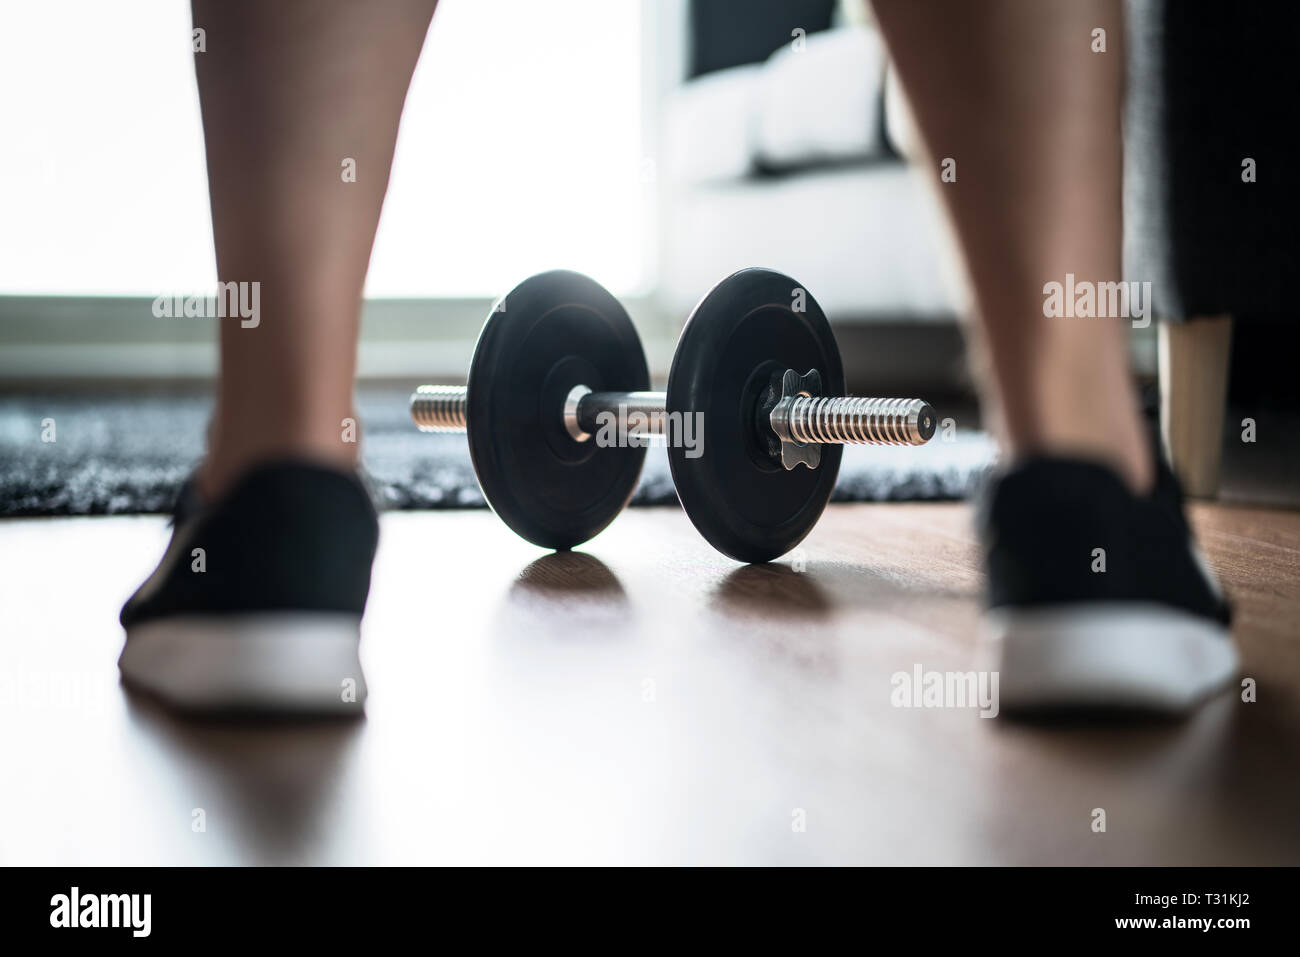 Fitness motivation, determination and challenge concept. Man starting workout and exercise. Muscle training in home gym. Dumbbell between sneakers. Stock Photo